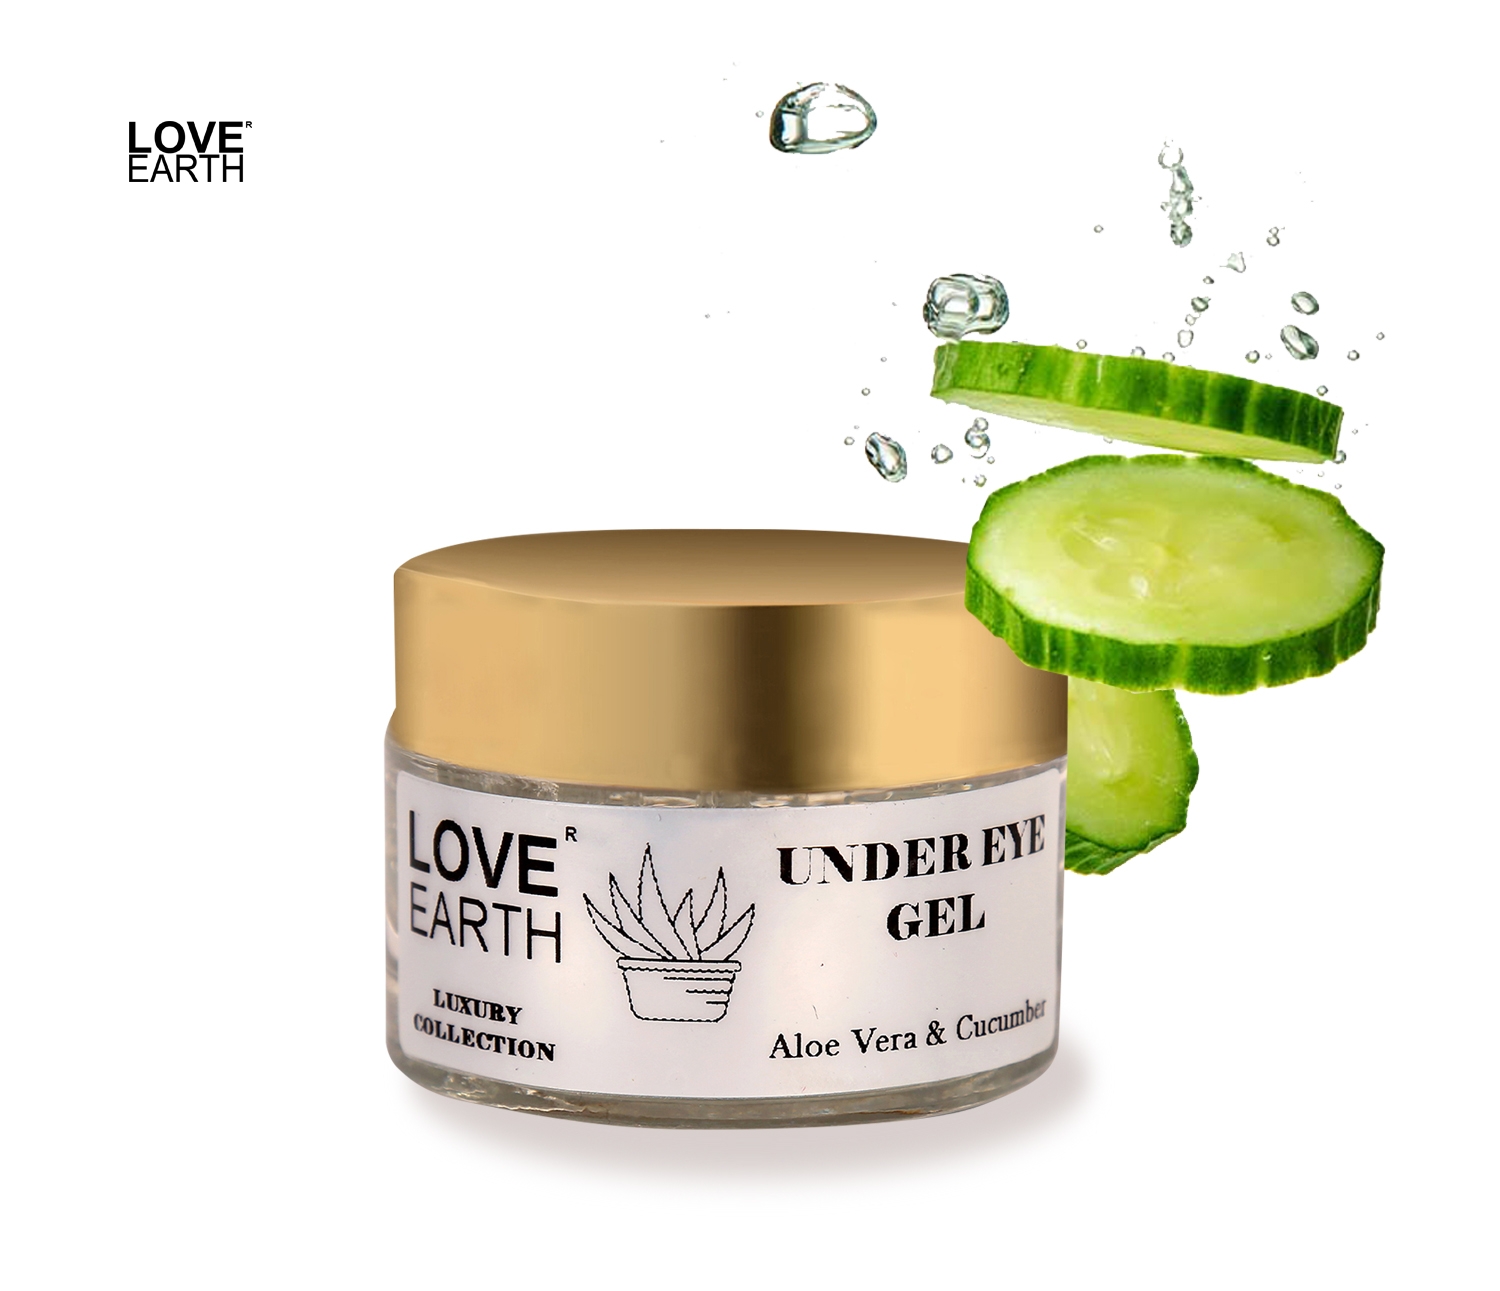 LOVE EARTH | Love Earth Organic Under Eye Gel with Aloe Vera & Cucumber Extracts Reduces Dark Circles, Puffiness and Fine Lines 50gm 1